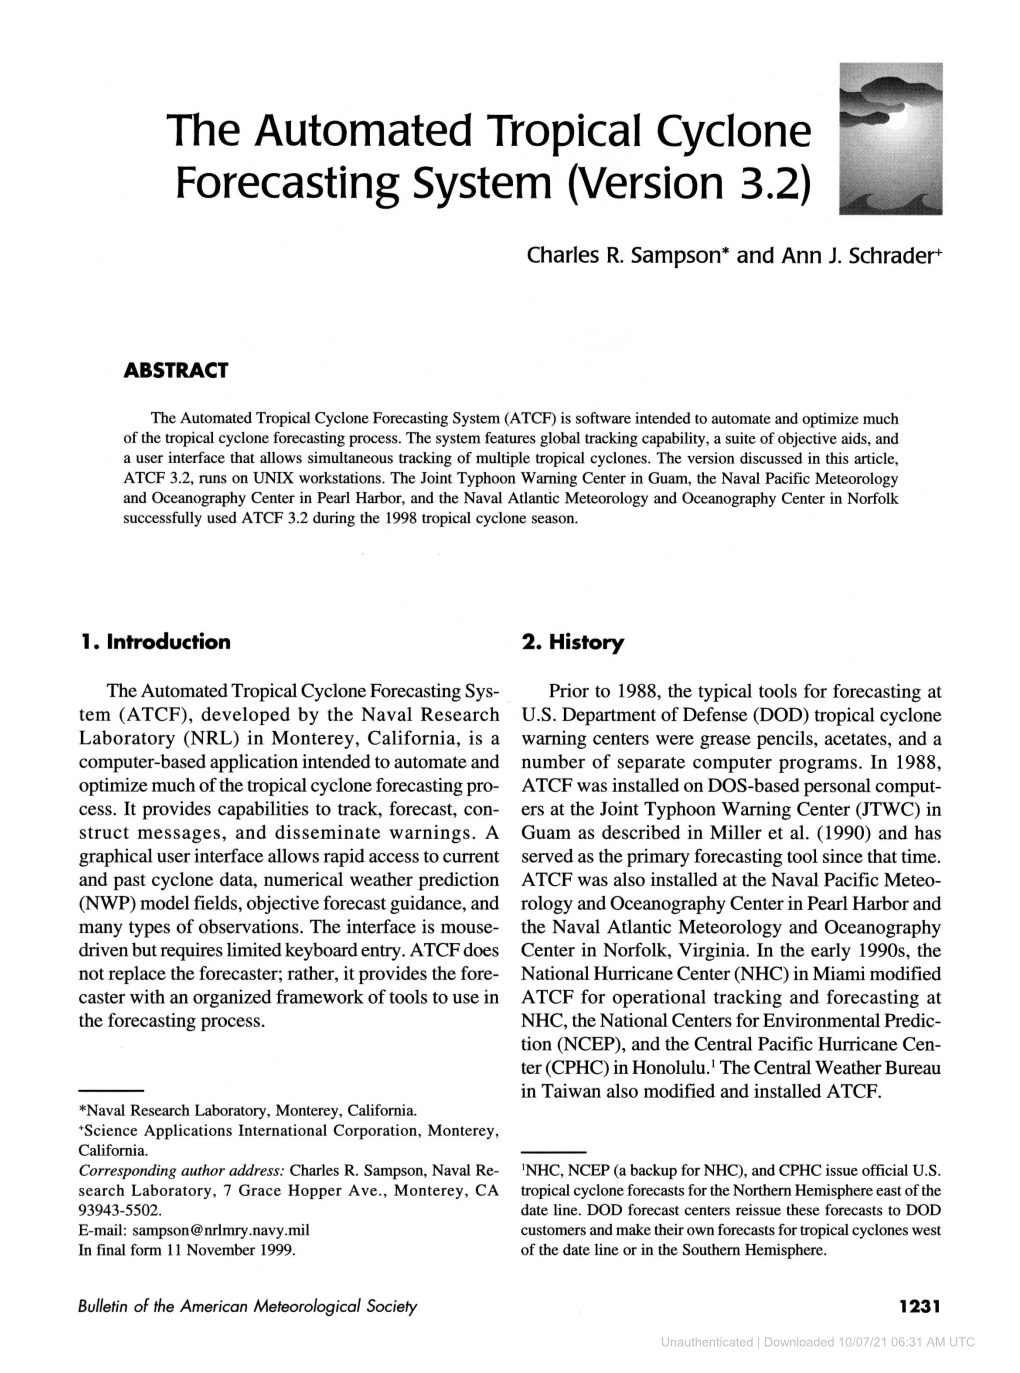 The Automated Tropical Cyclone Forecasting System (Version 3.2)